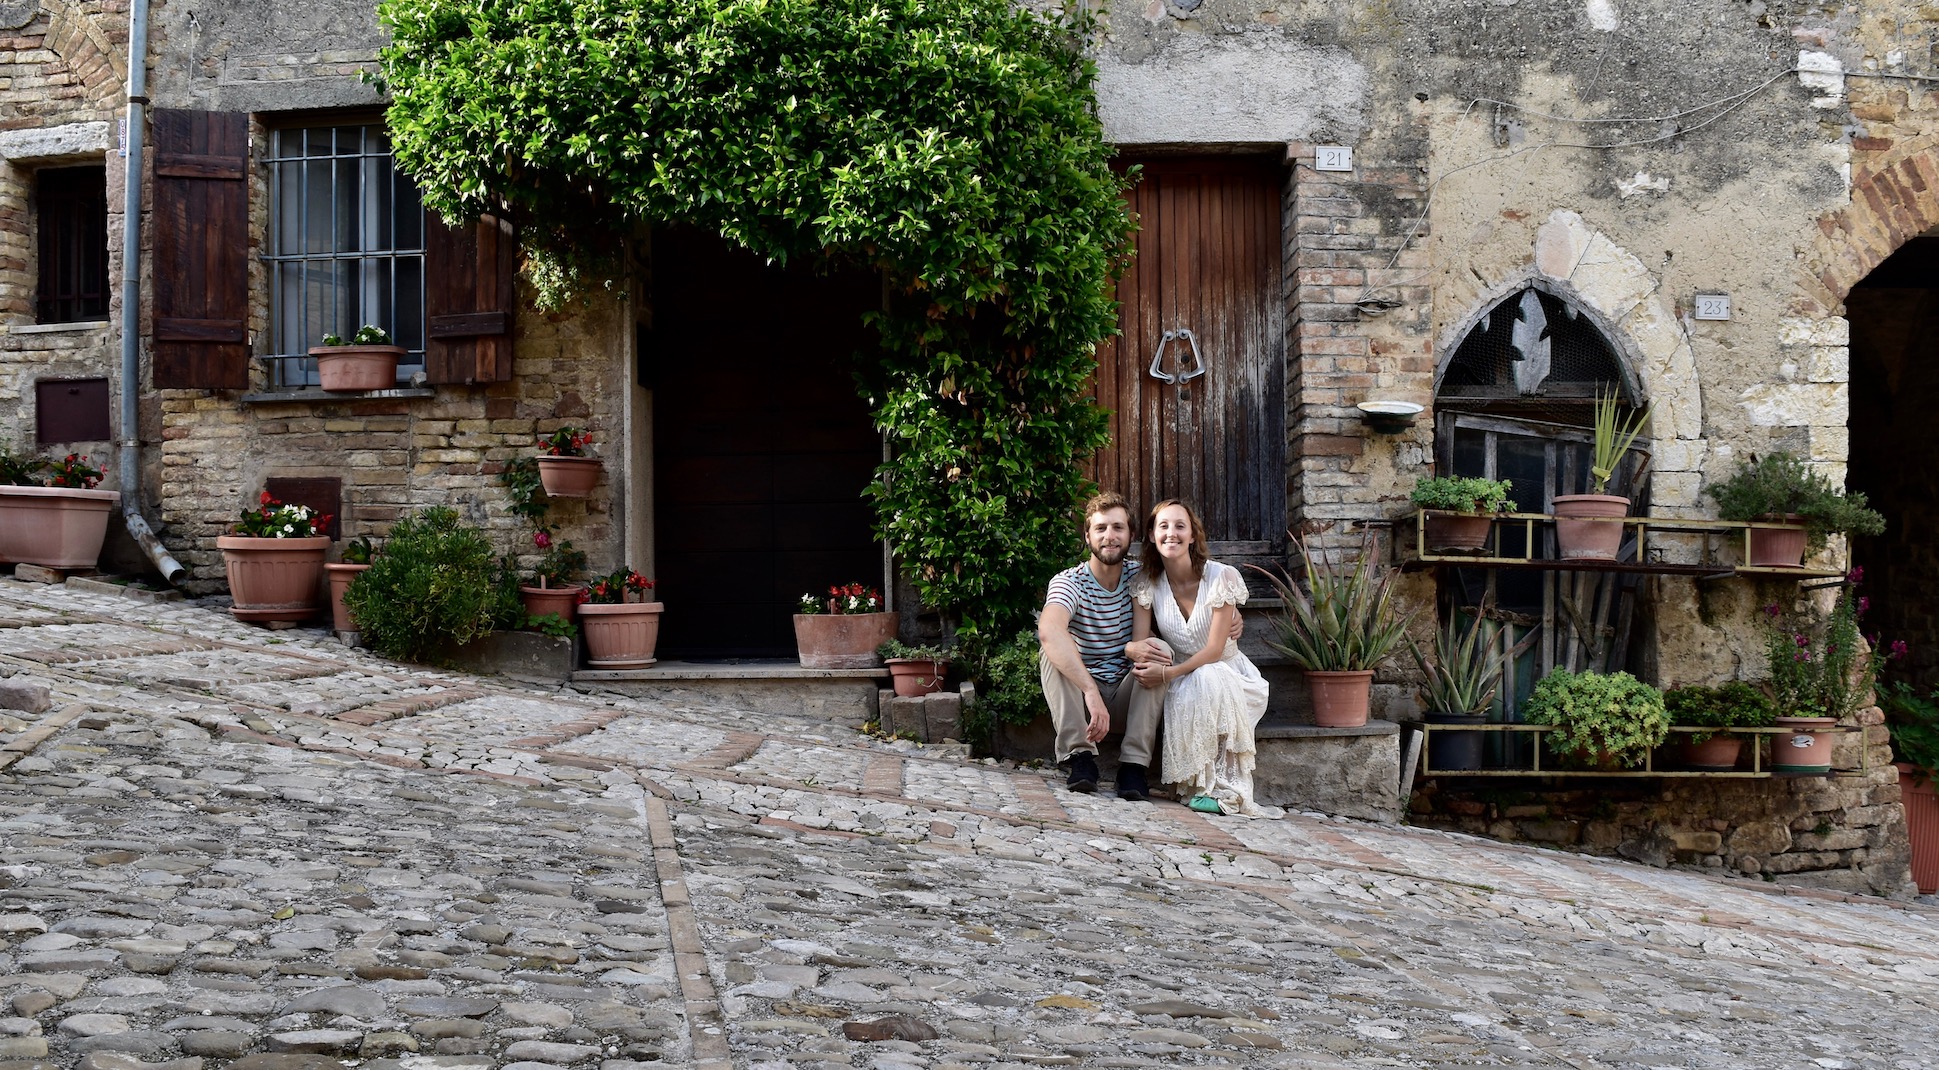 Hayley and Enrico on a cobbled street in a hill town in Umbria 